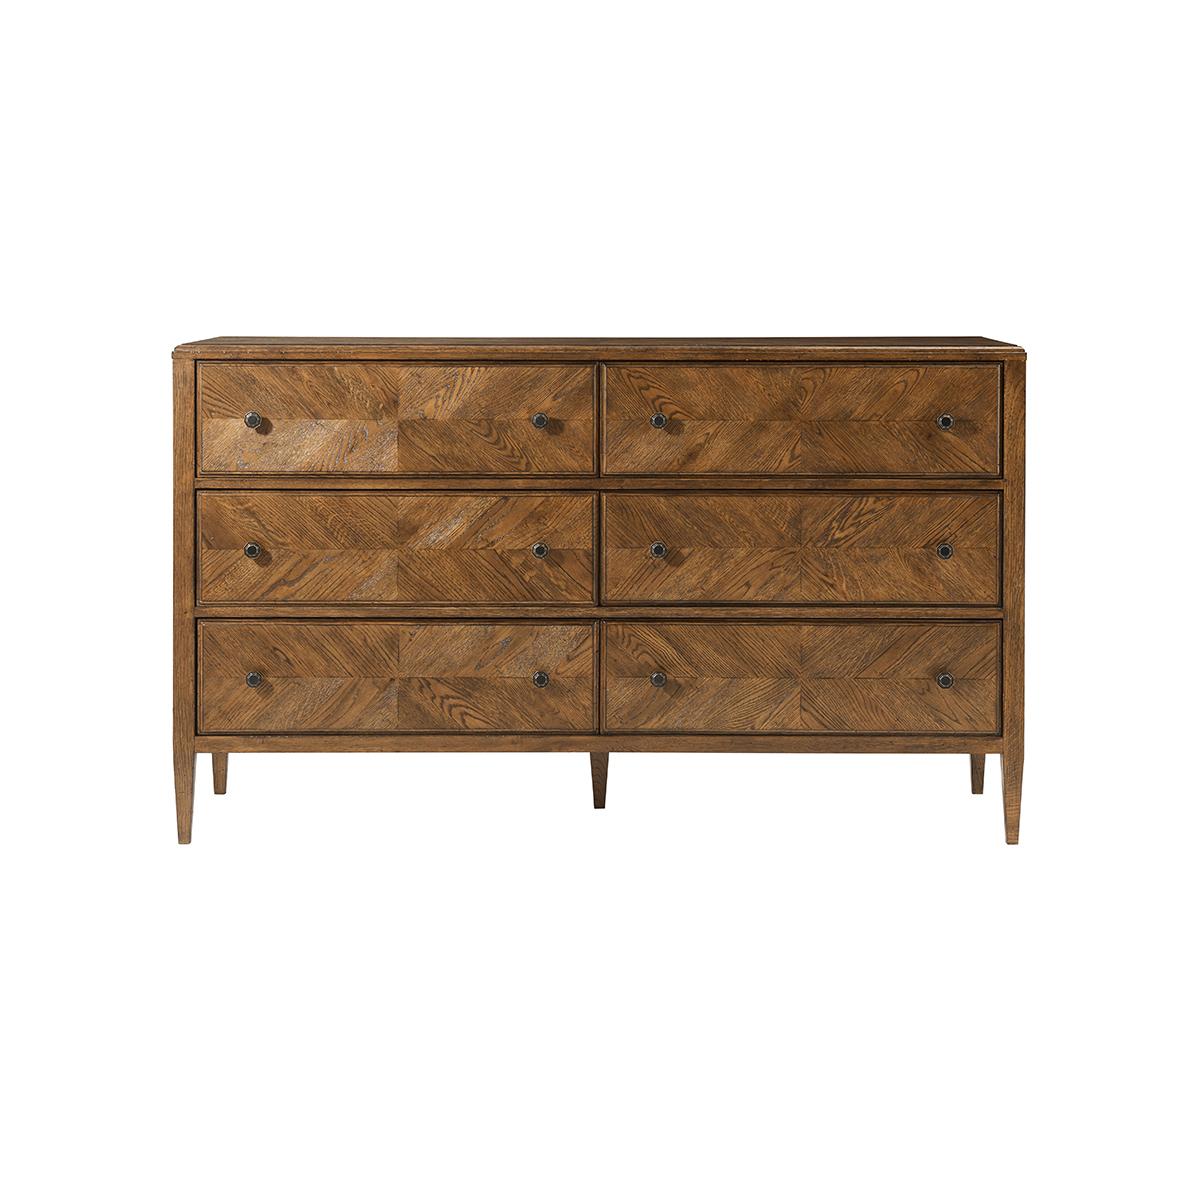 A dark rustic-style oak parquetry dresser with six hand-veneered drawers accented with Verde Bronze finish handles and tapered oak legs. 

Shown in Dusk finish
Dimensions
63.5